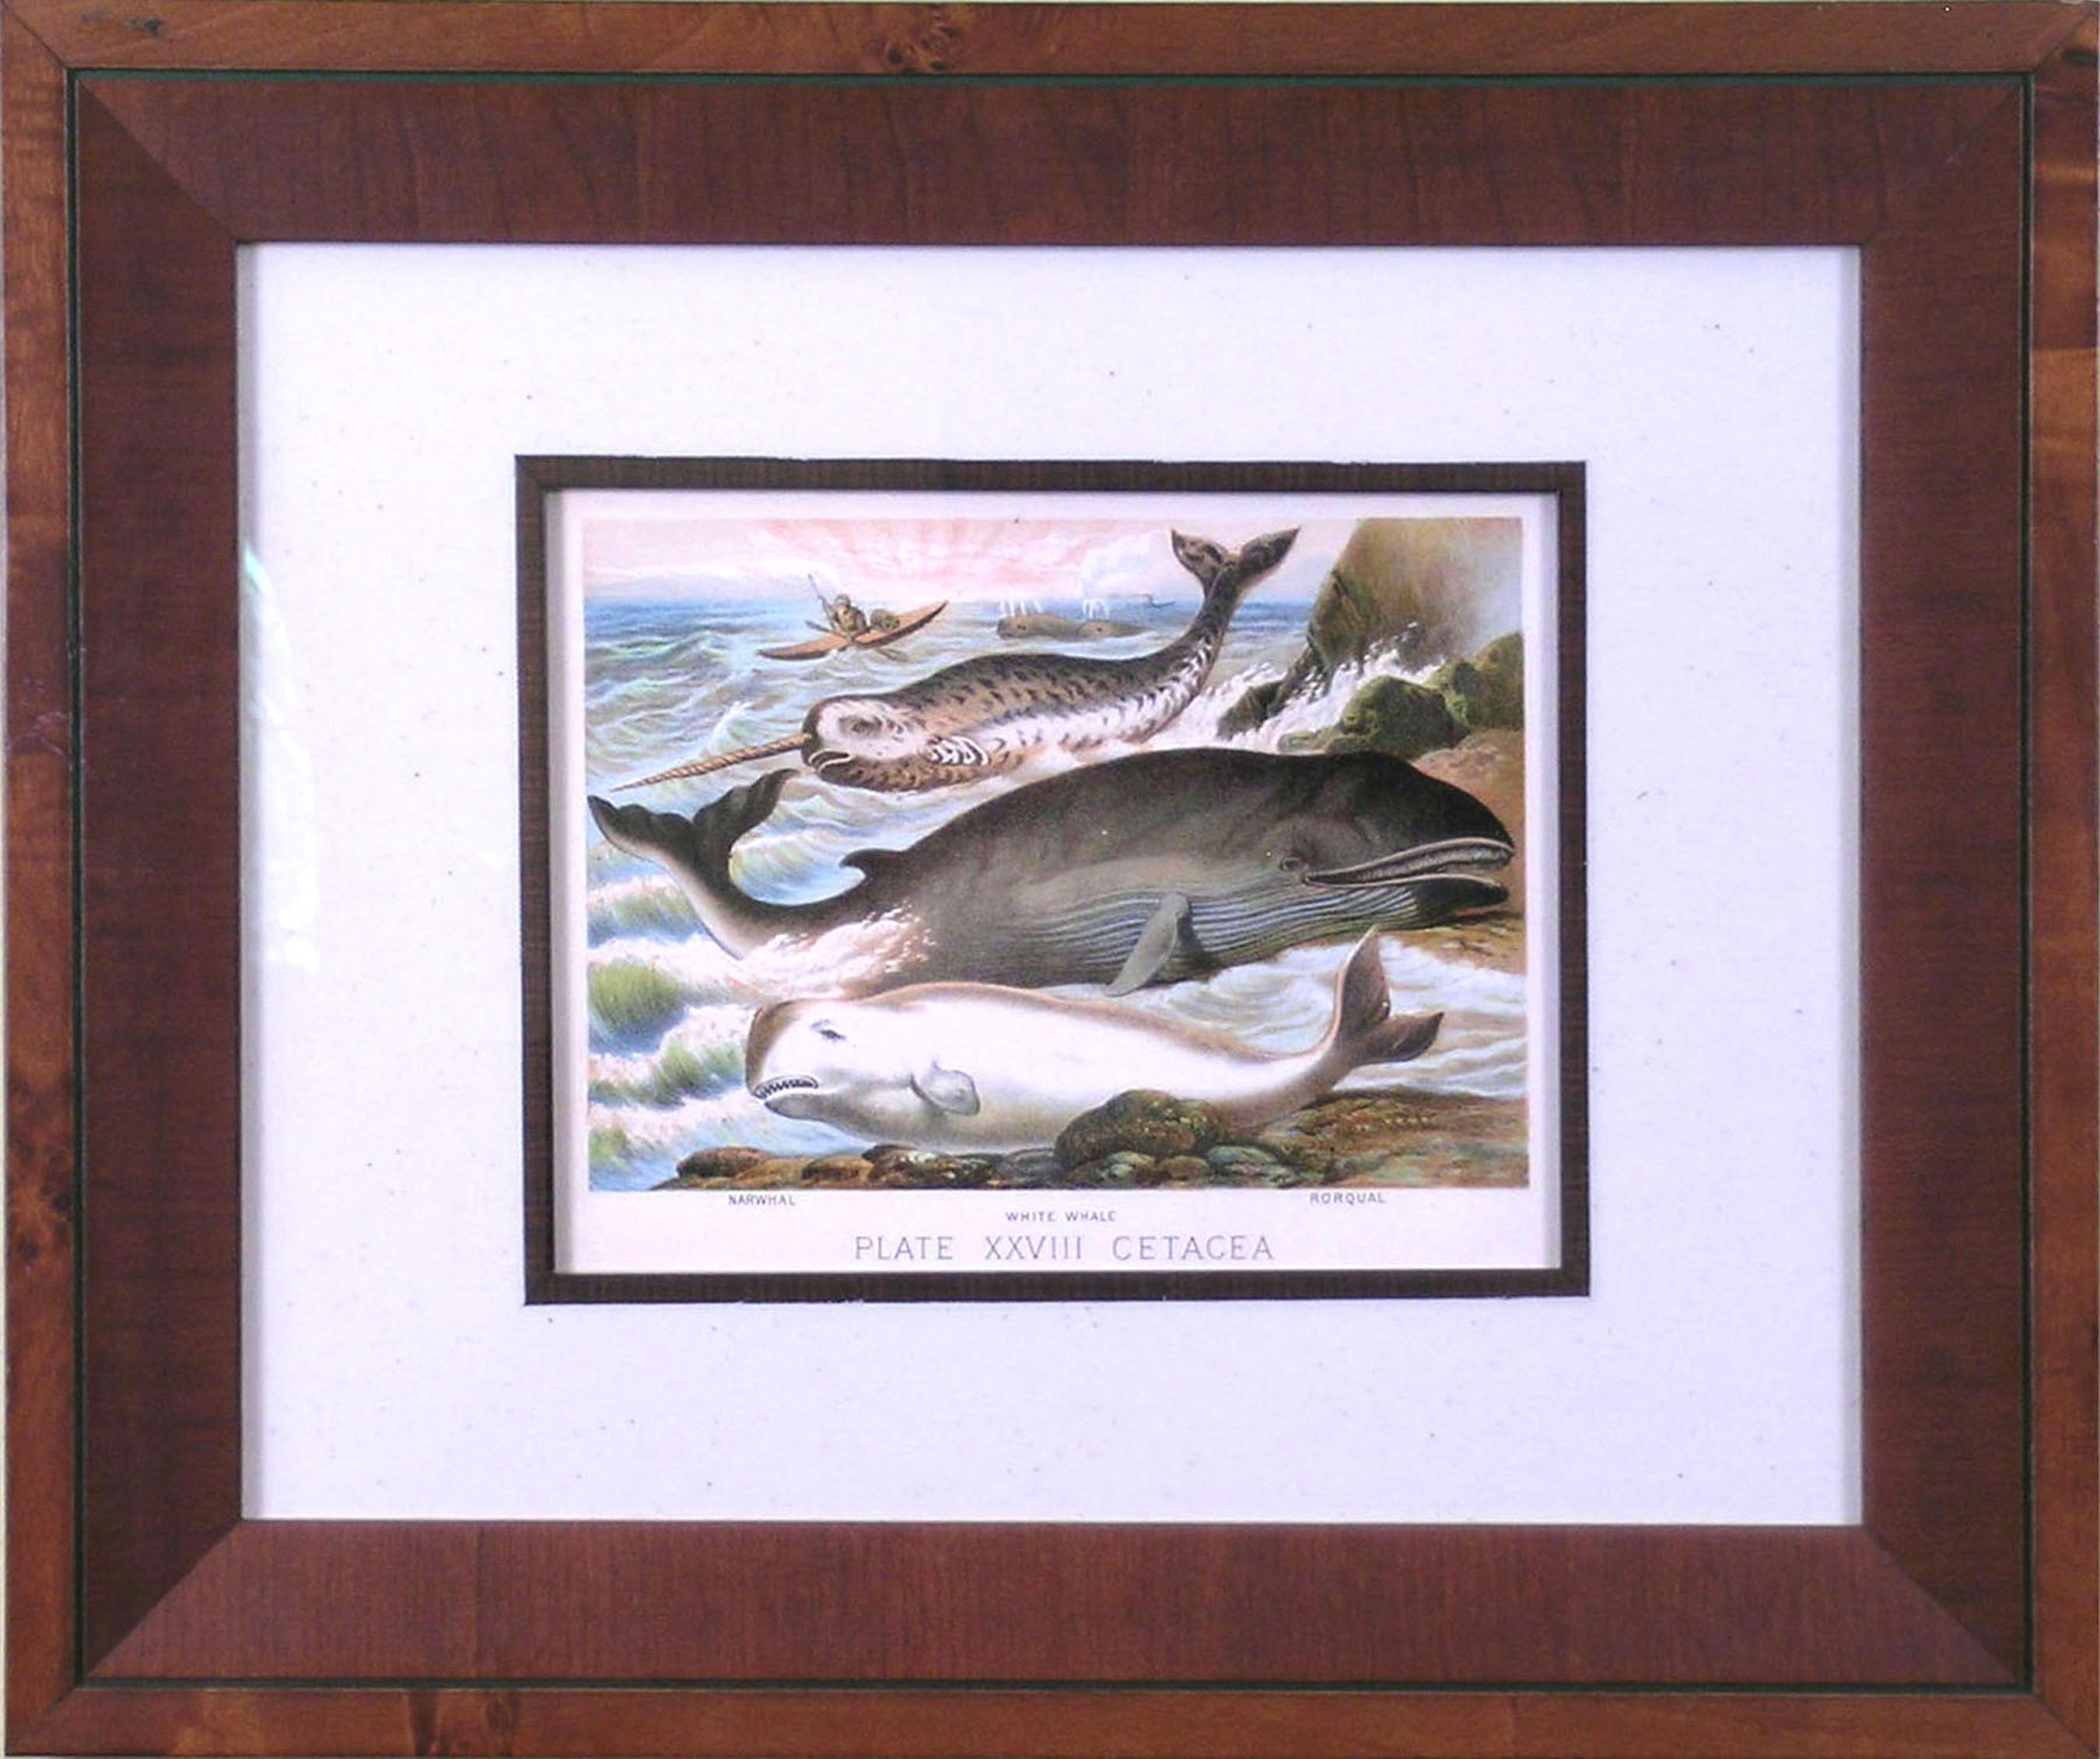 Plate XXVII. Cetacea.  Narwhal, White Whale, Rorqual (Baleen Whales) - Print by Henry J. Johnson